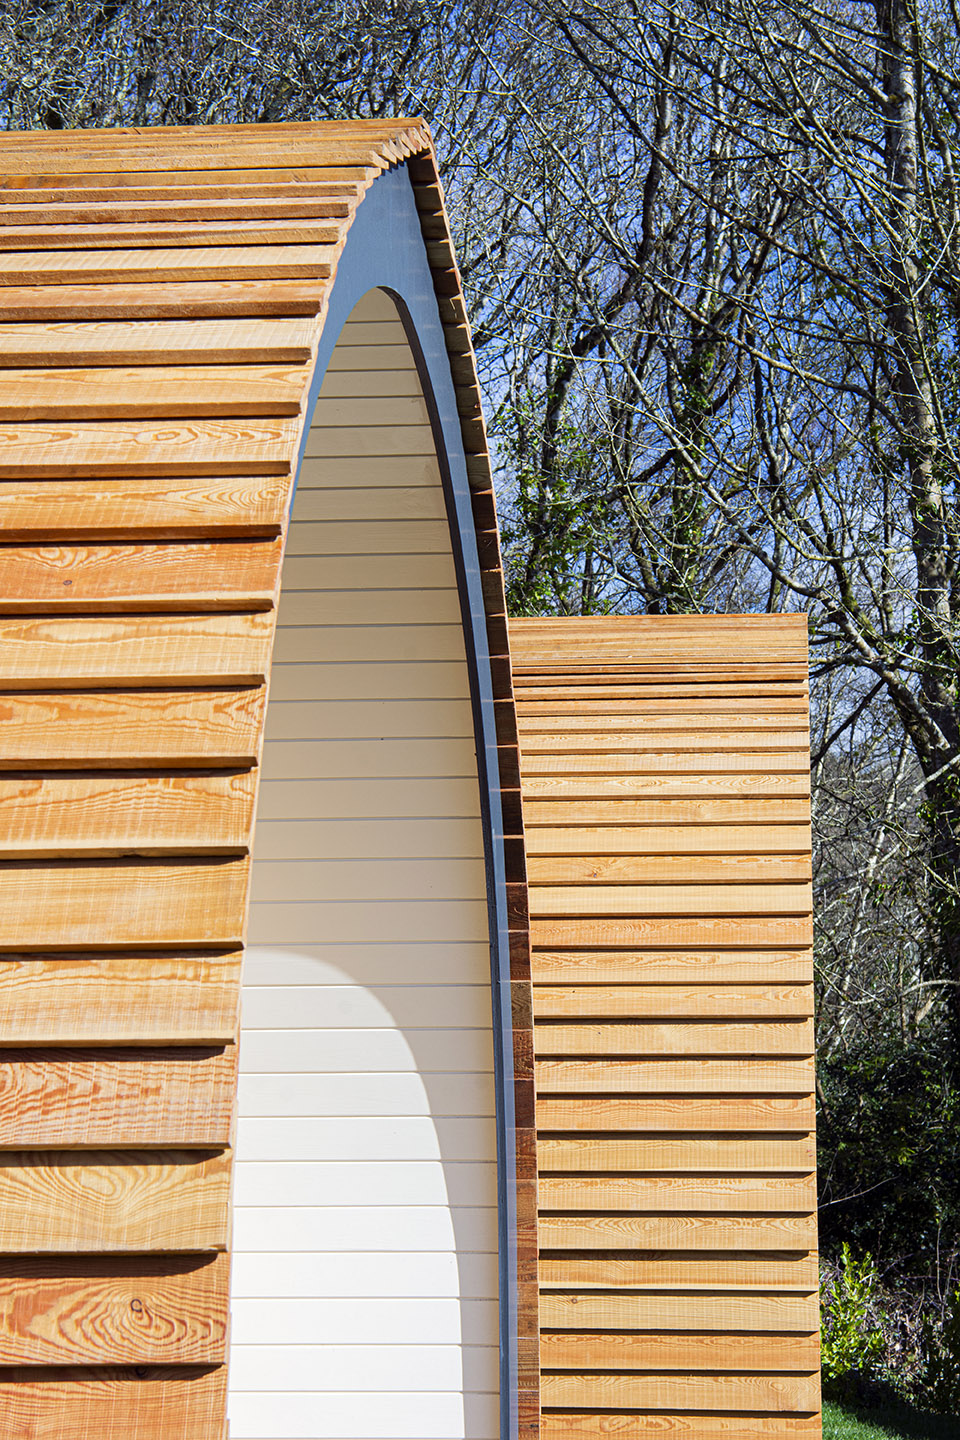 Image shows the roofline of the garden pods holiday accommodation at the Polgooth Inn with trees in the background